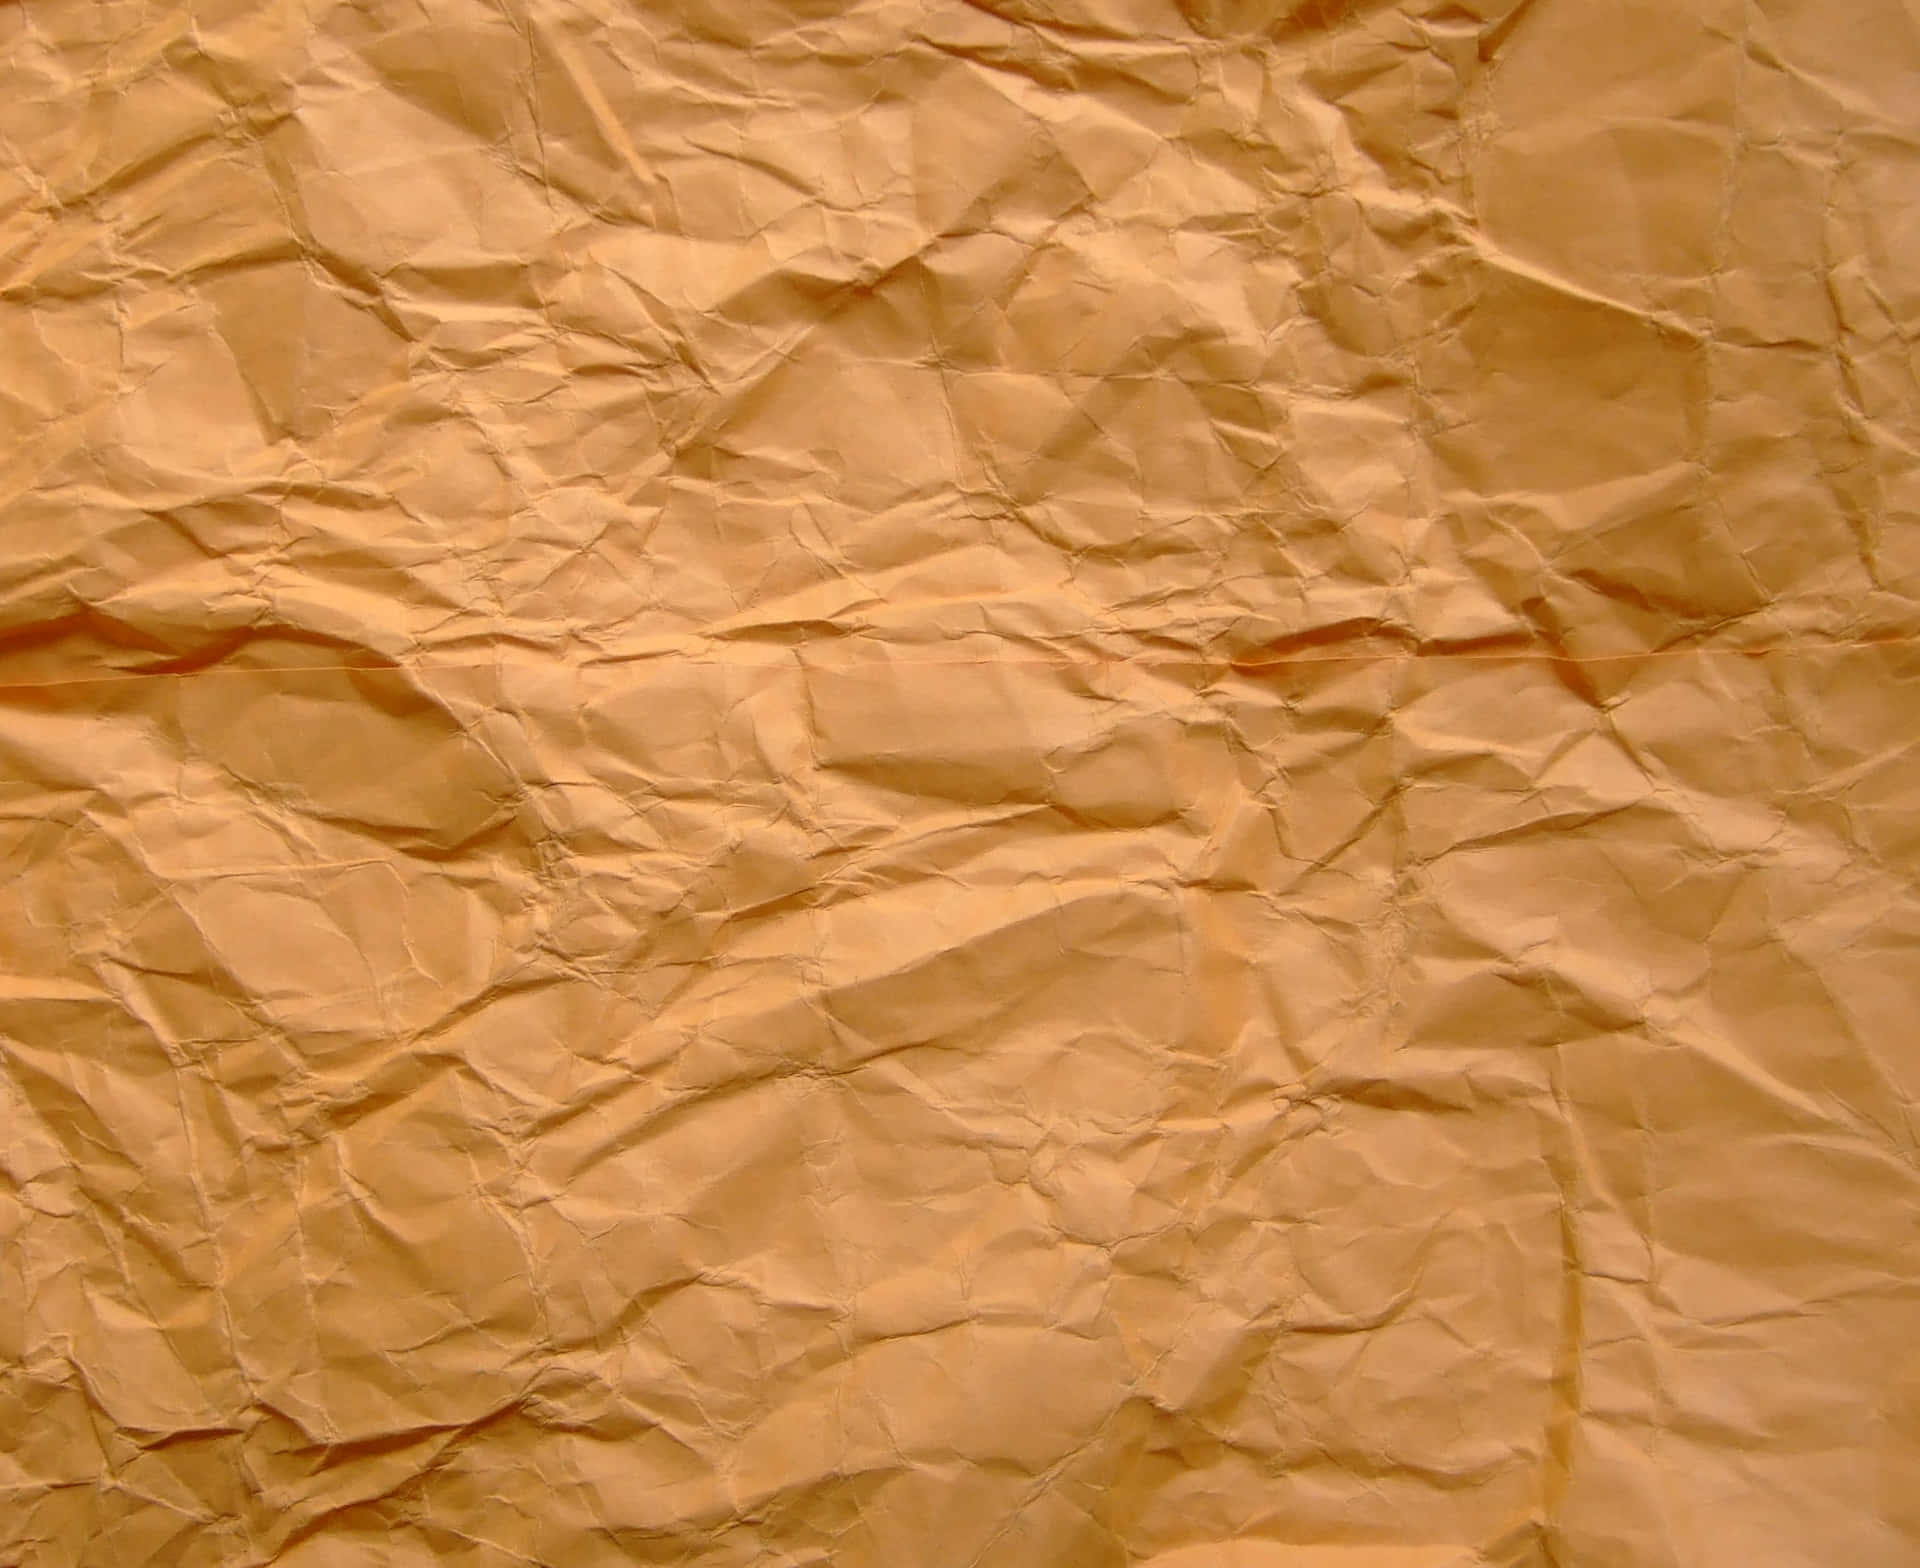 200+] Paper Texture Backgrounds